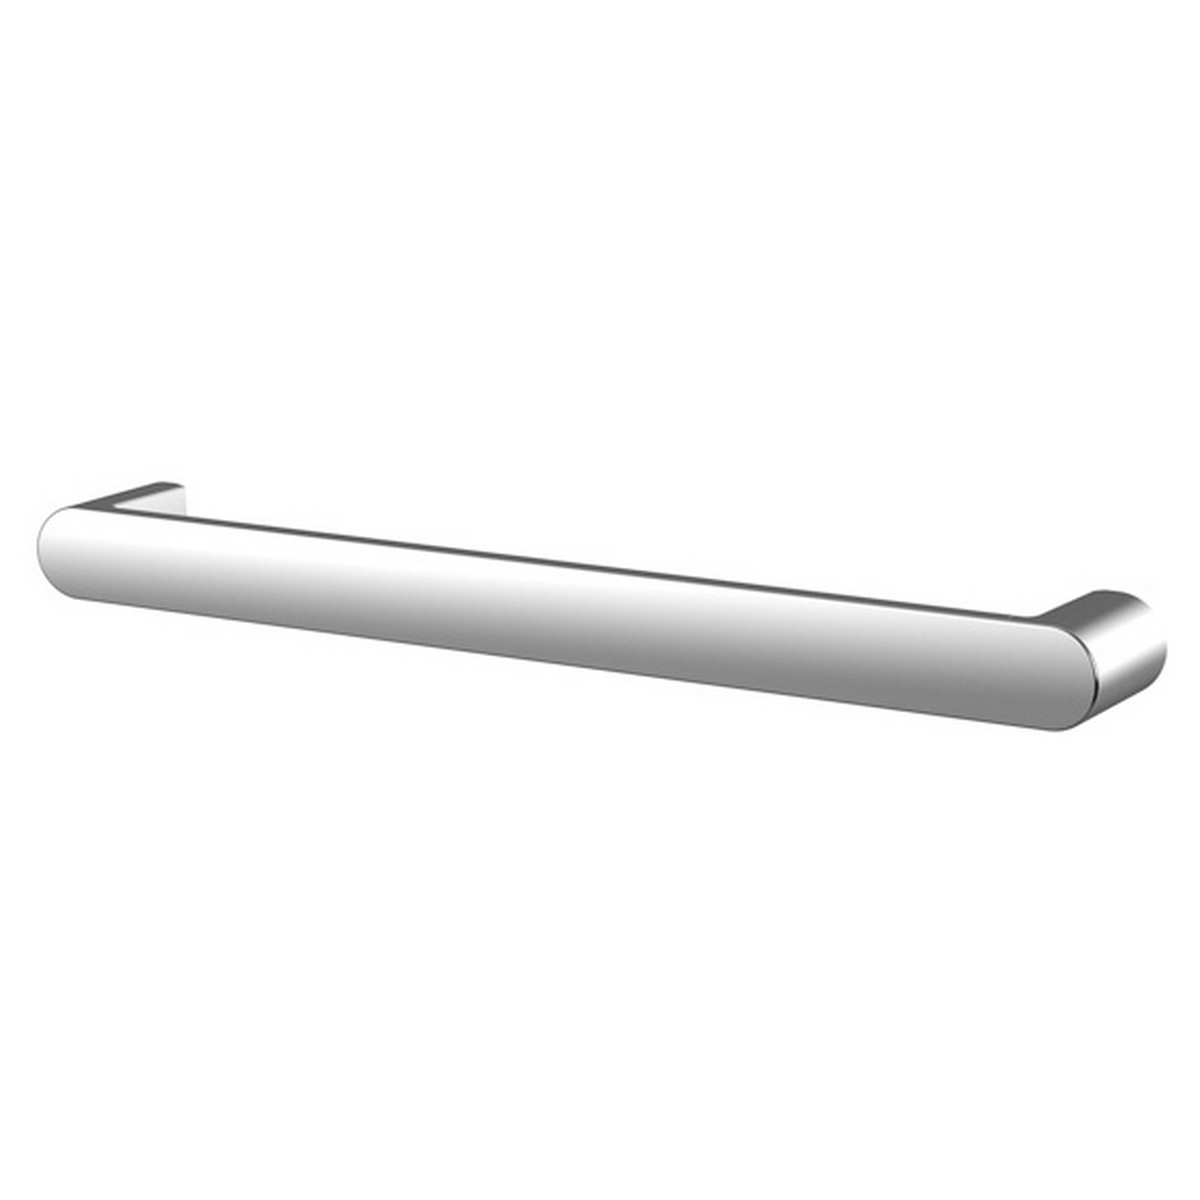 KEUCO 31601010800 ELEGANCE 32 5/8 INCH WALL MOUNTED SUPPORT RAIL IN POLISHED CHROME